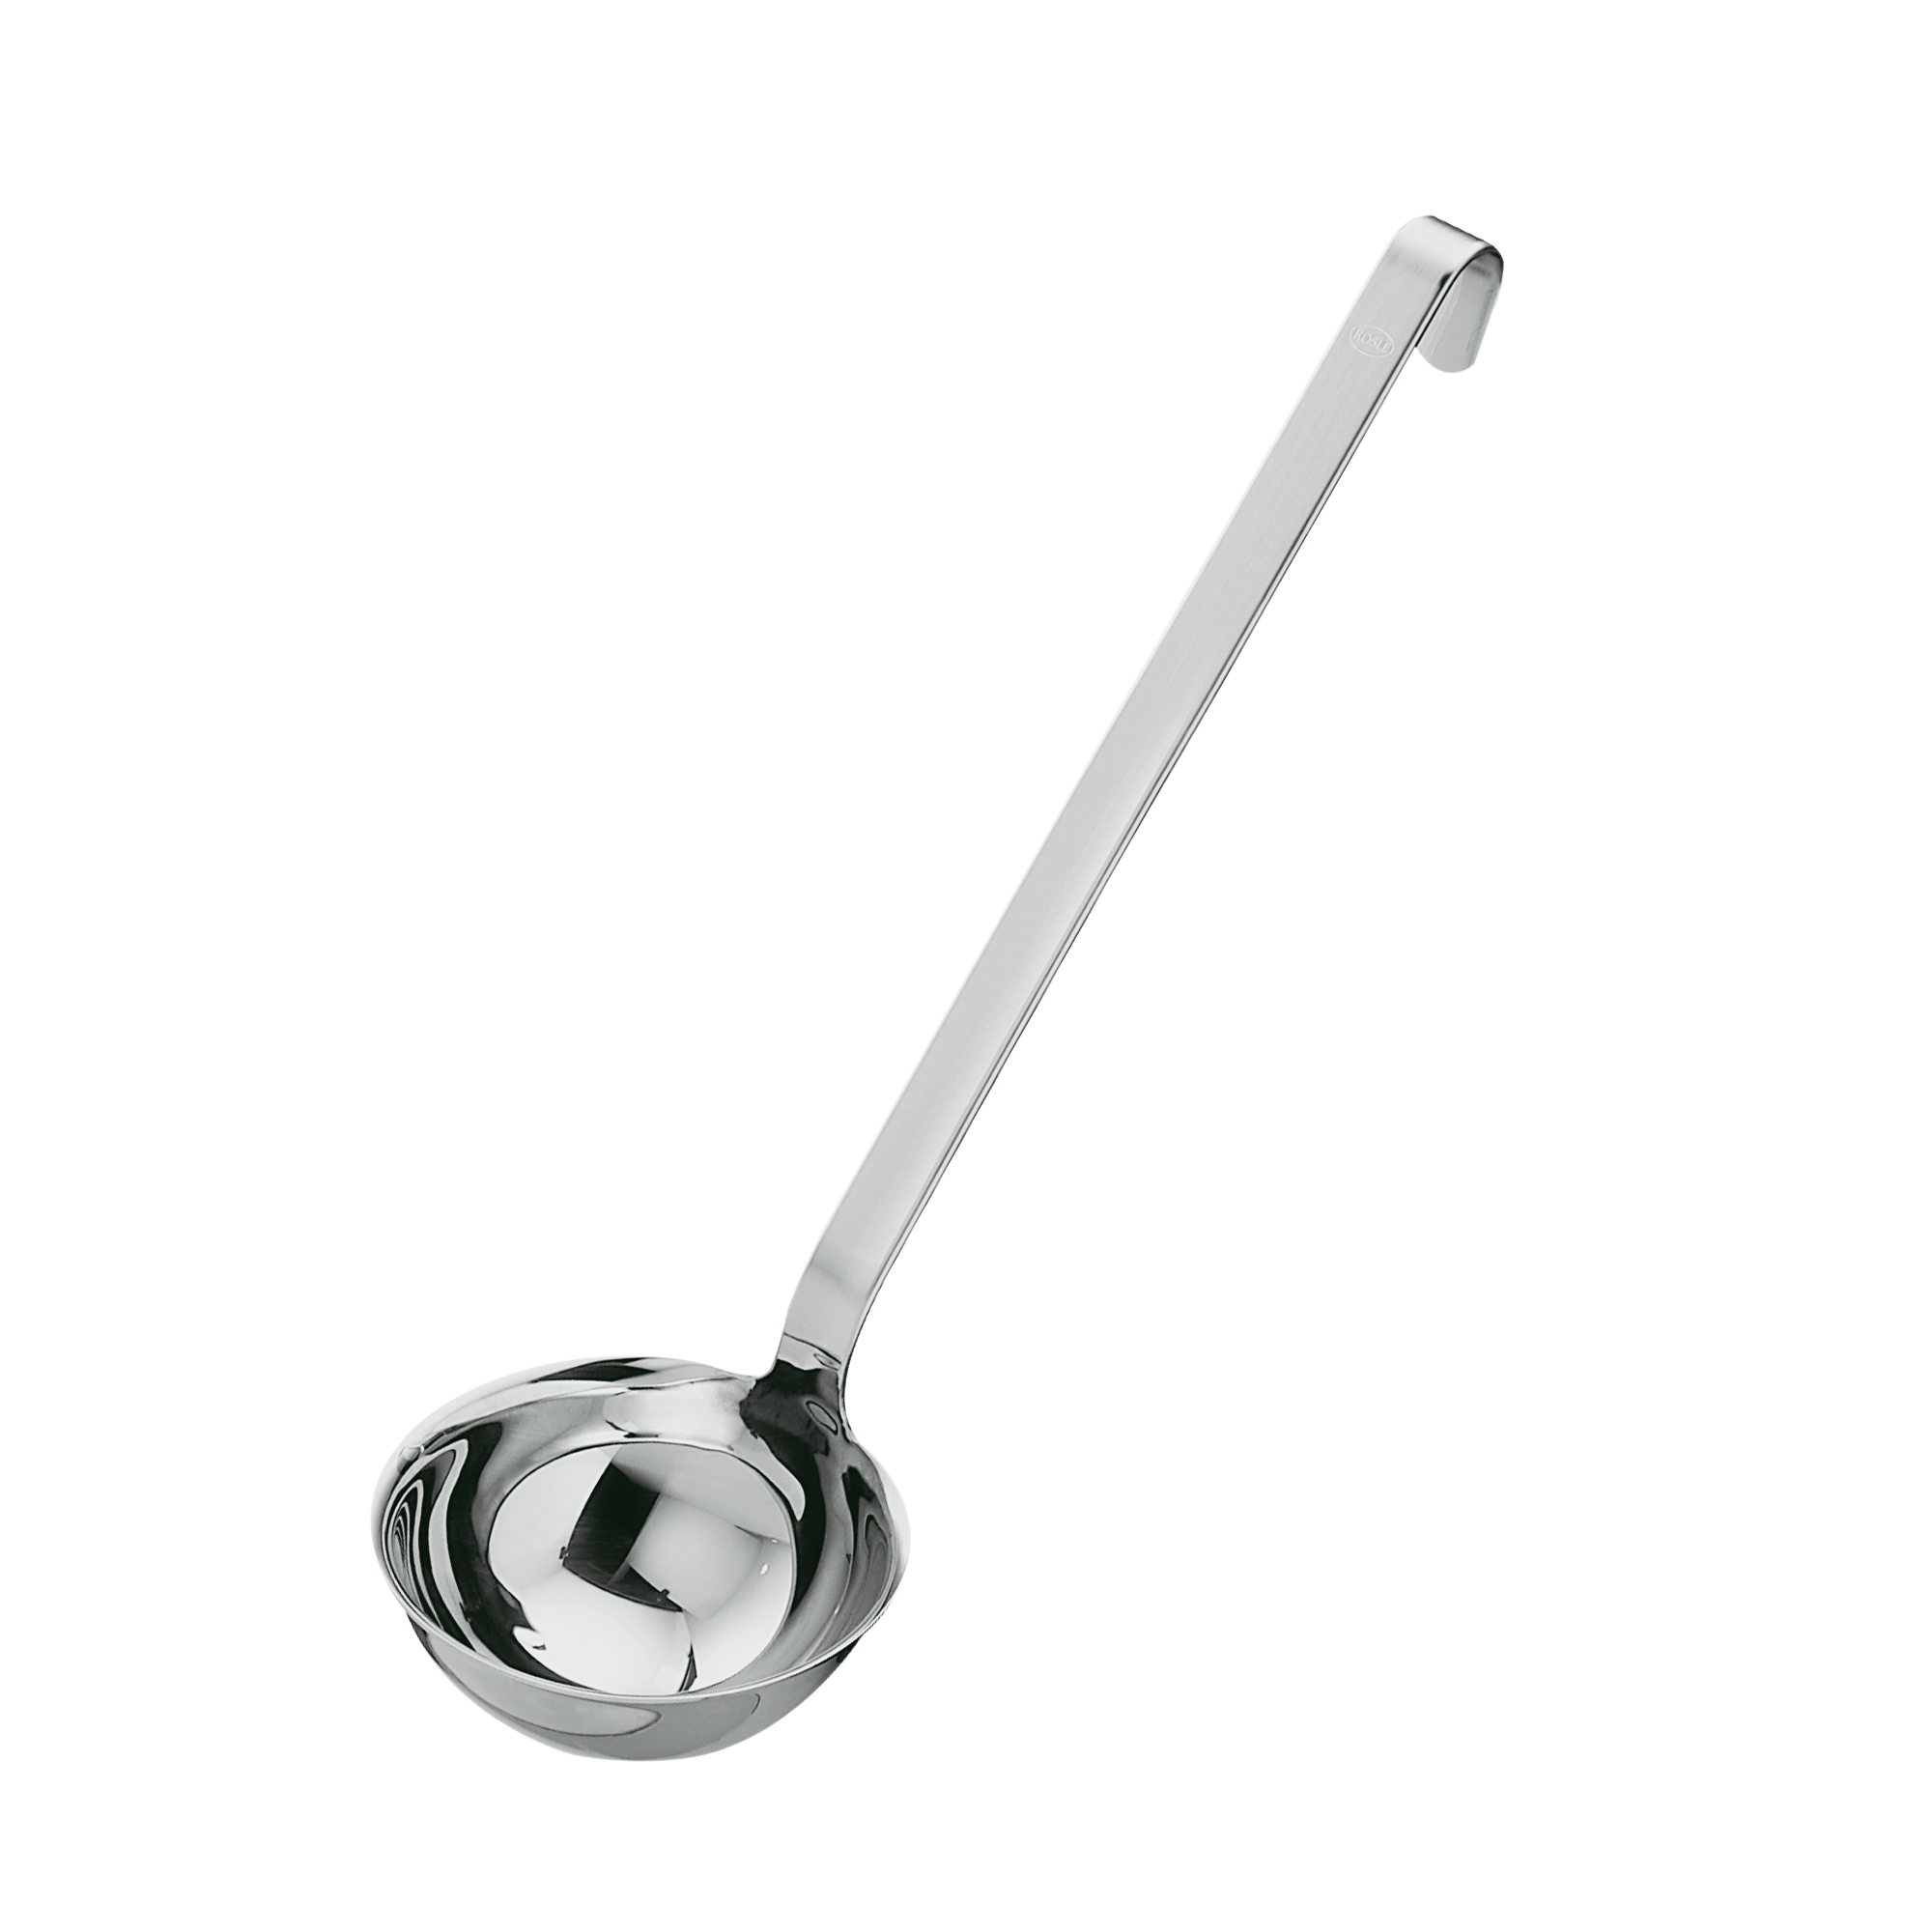 Hook Ladle with pouring rim Ø 8 cm|3.2 in.